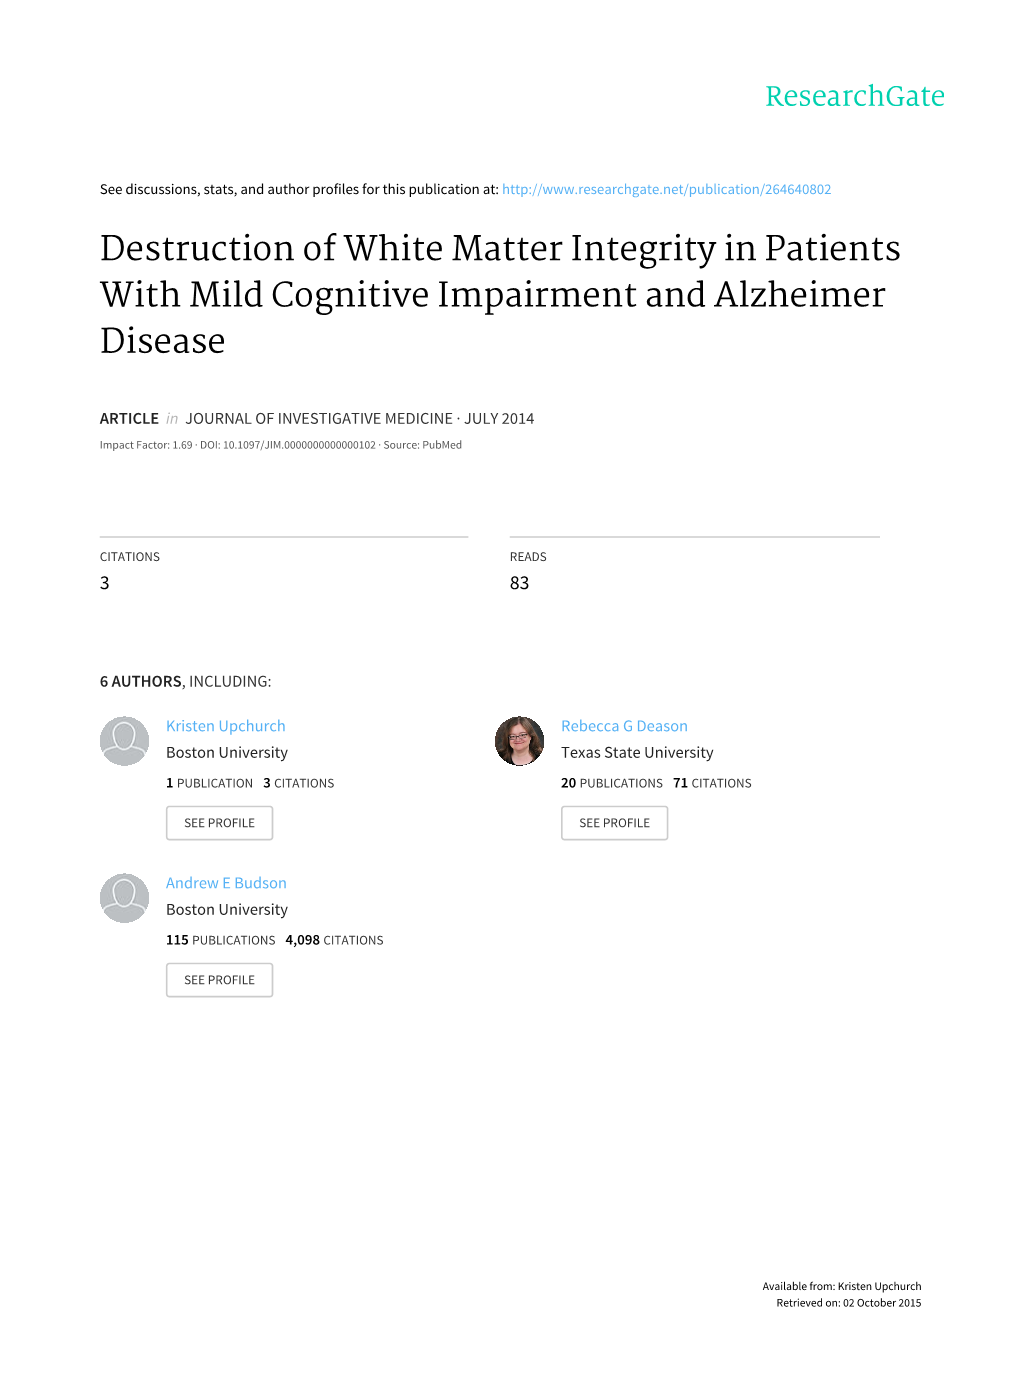 Destruction of White Matter Integrity in Patients with Mild Cognitive Impairment and Alzheimer Disease